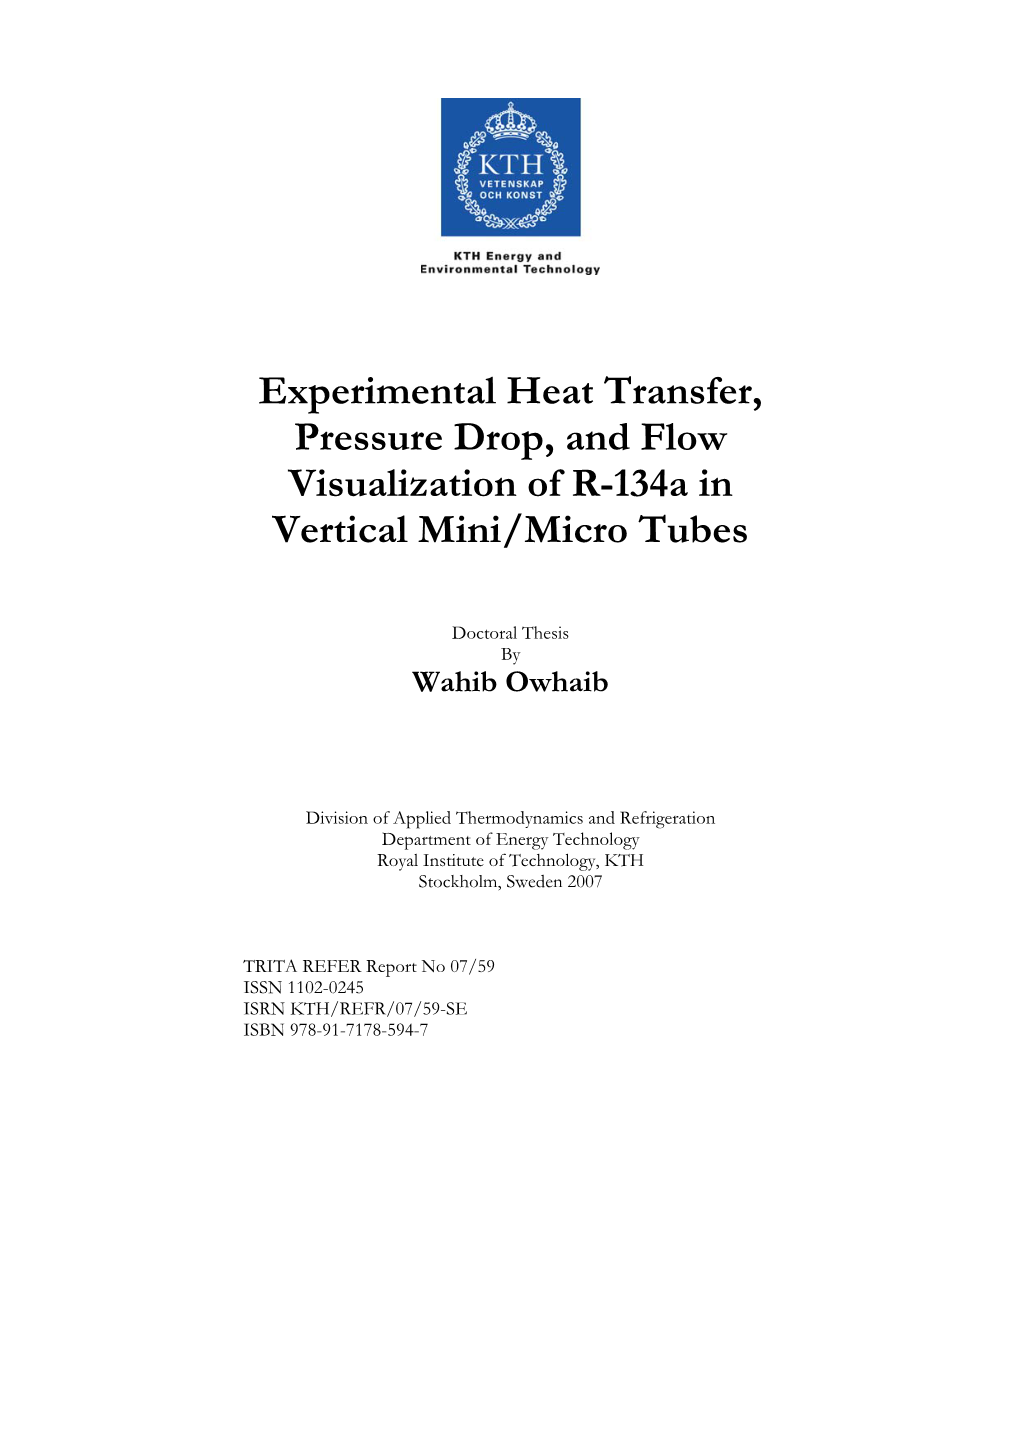 Forced Convection Single-Phase and Boiling in Mini and Micro Tube